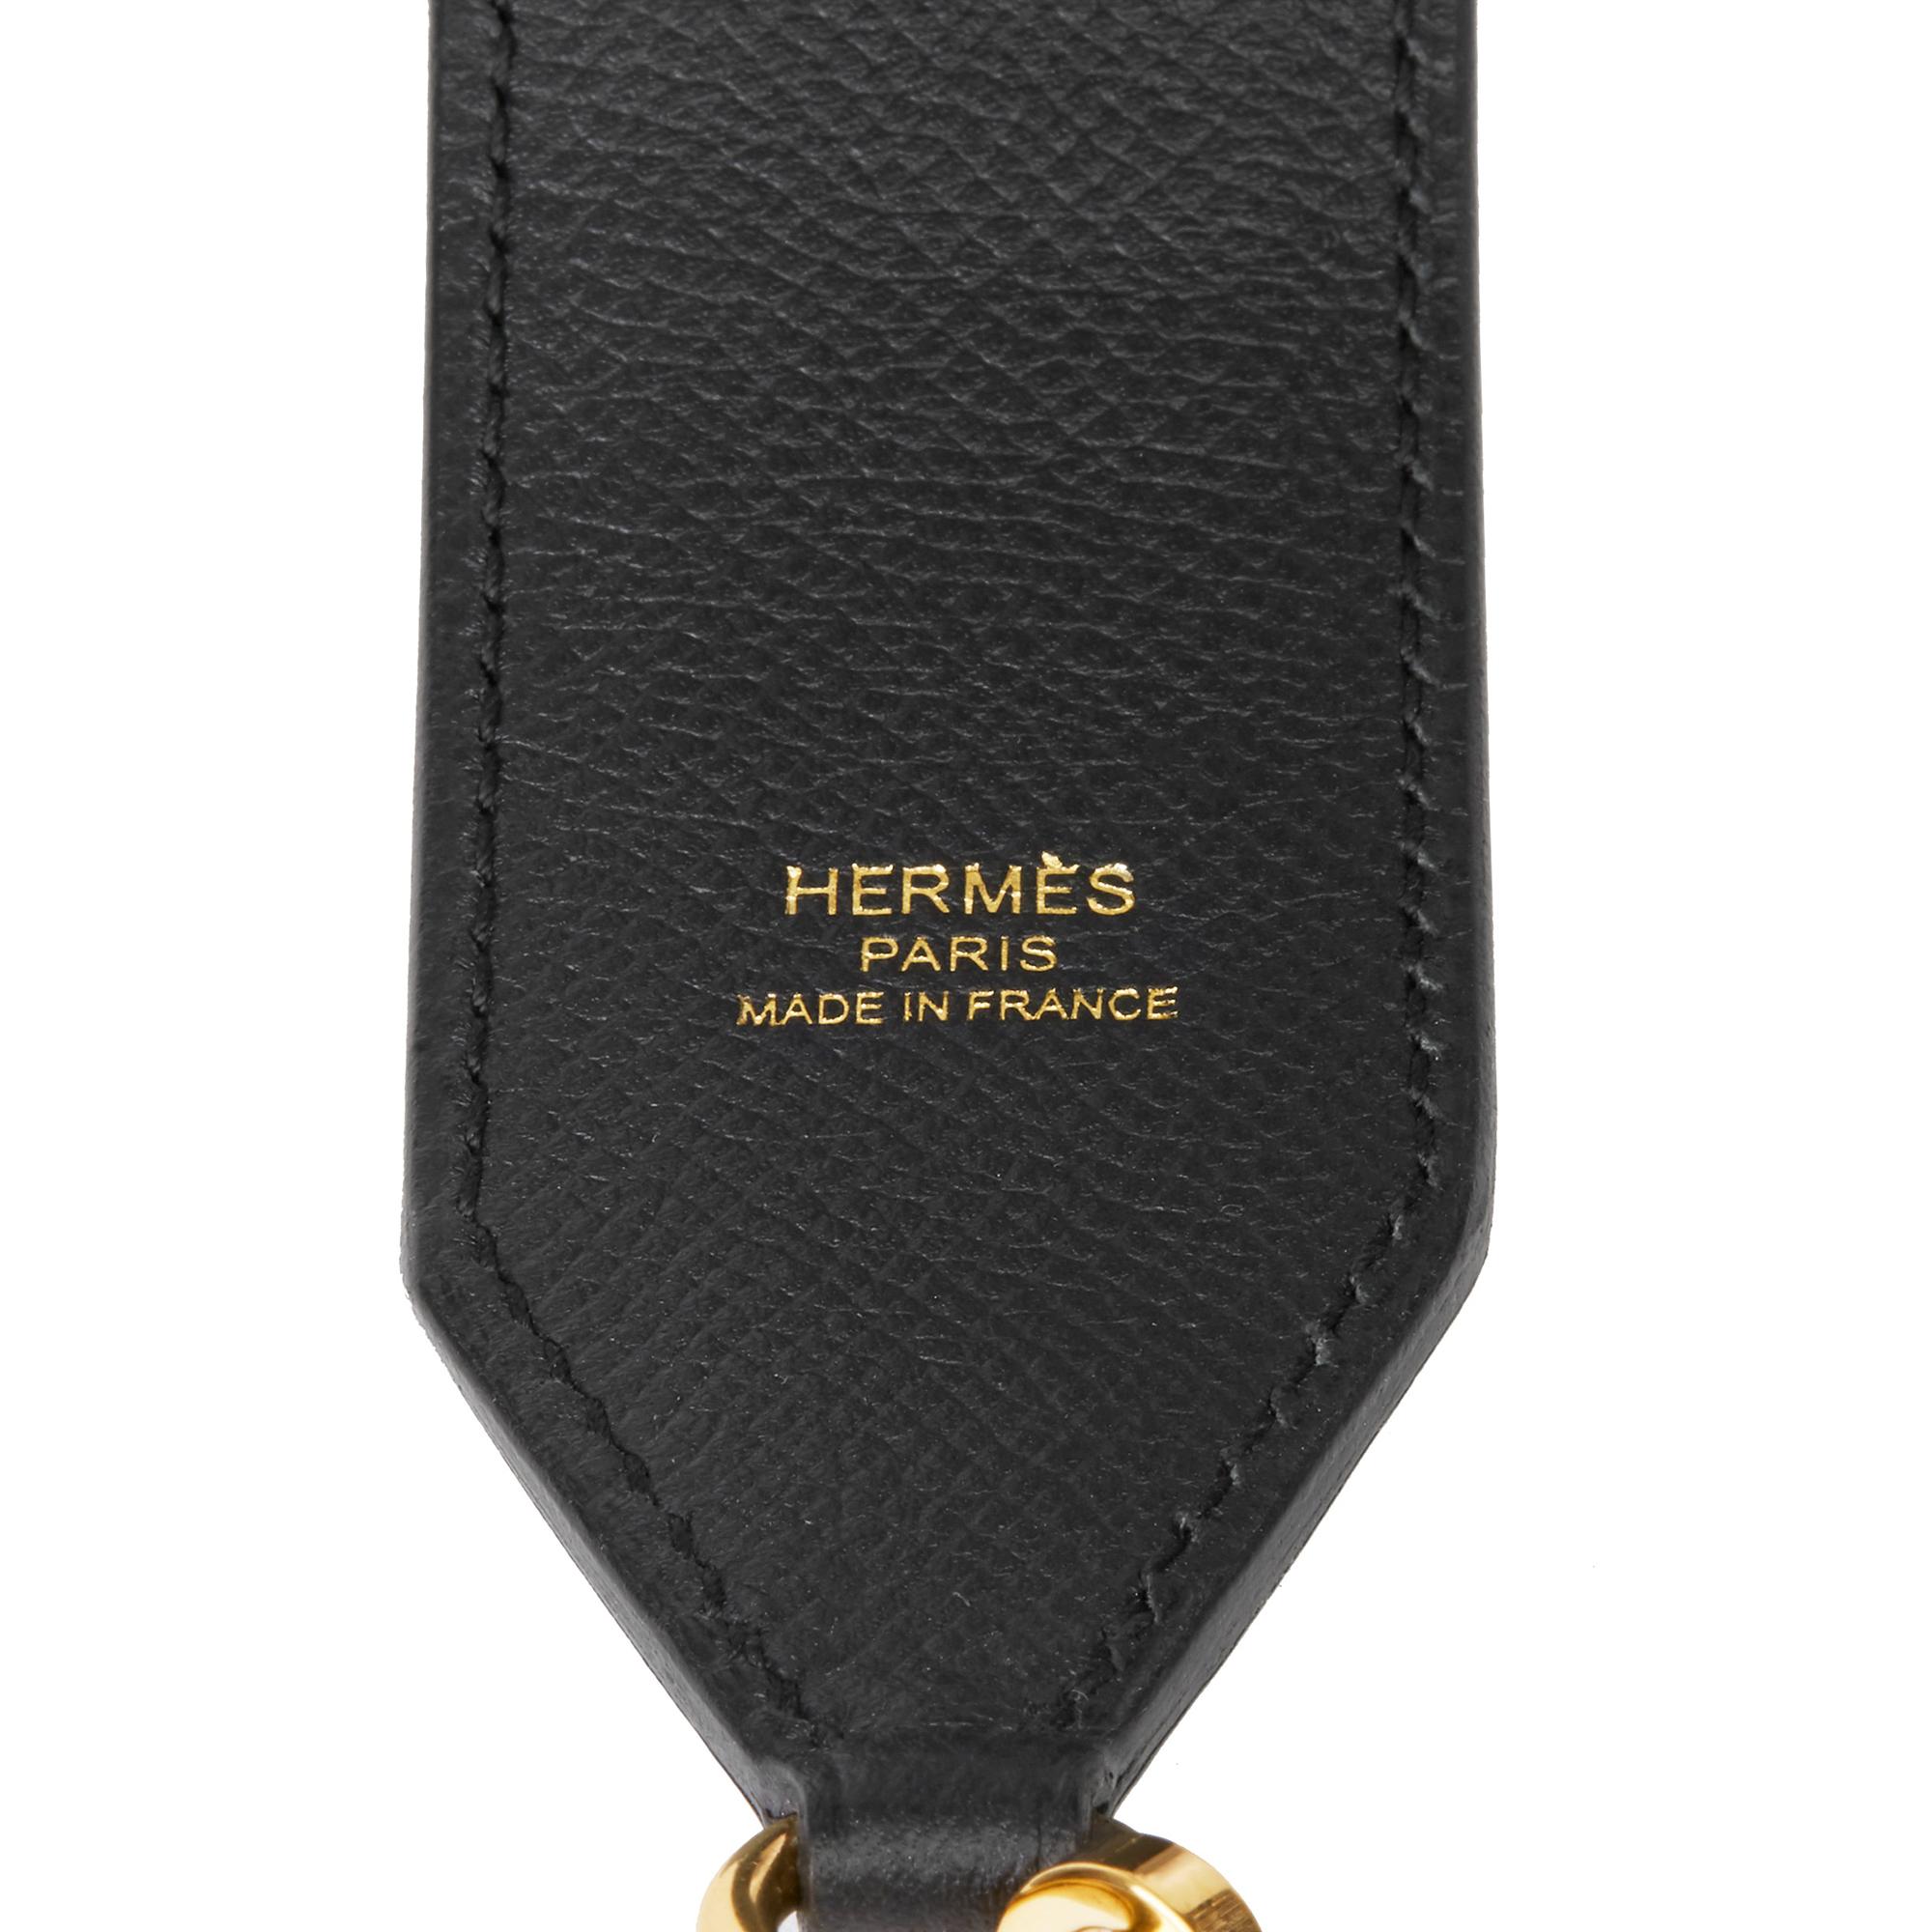 HERMÈS
Black, Lime & Malachite Epsom Leather Tressage 40mm Bag Strap

Xupes Reference: SKHB015
Serial Number: C
Age (Circa): 2018
Accompanied By: Hermès Dust Bag, Box
Authenticity Details: Date Stamp (Made in France)
Gender: Ladies
Type: